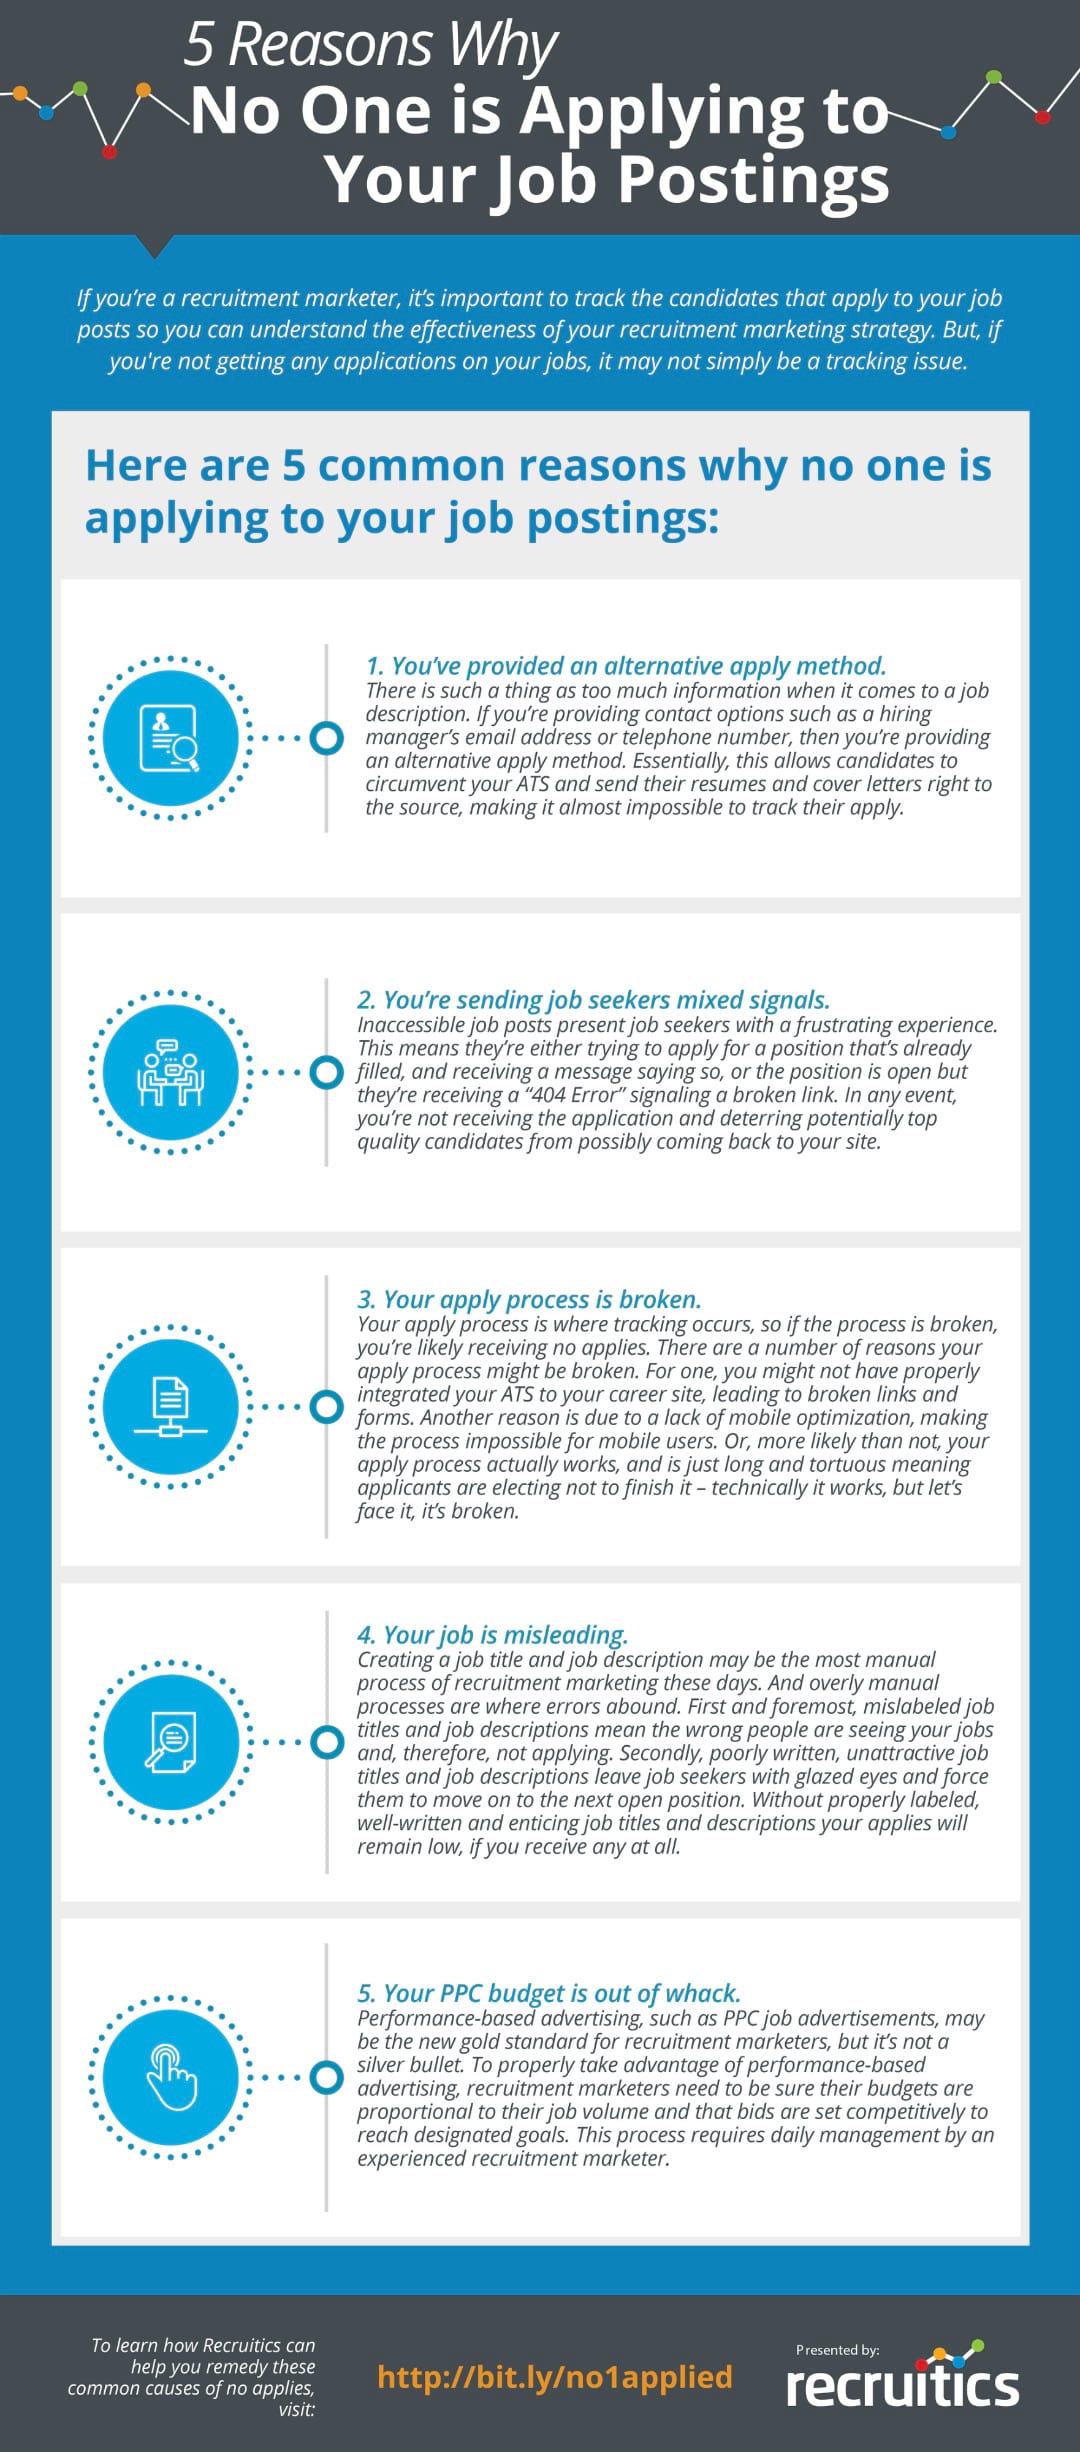 In this infographic we cover the five reasons why people aren't applying to your job postings.